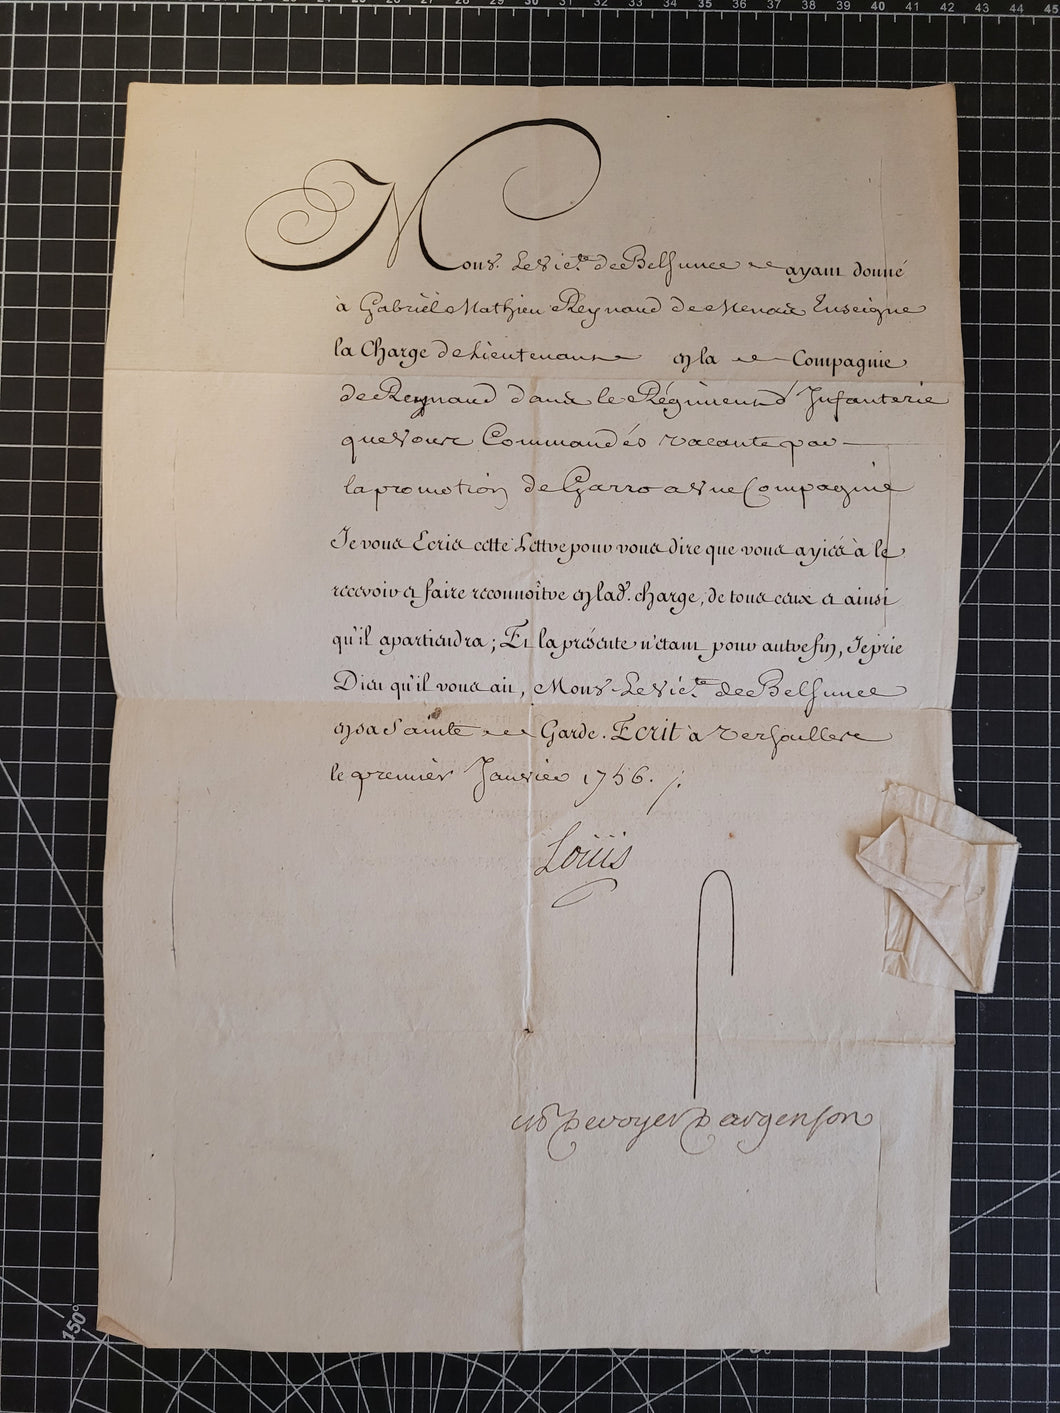 Military Letter of Promotion by Louis XV in favor of Gabriel Mathieu Reynaud de Menais, to the position of Lieutenant. Manuscript on Paper, with secretarial signature of Louis XV and signature of Secretary of State for War, January 1756